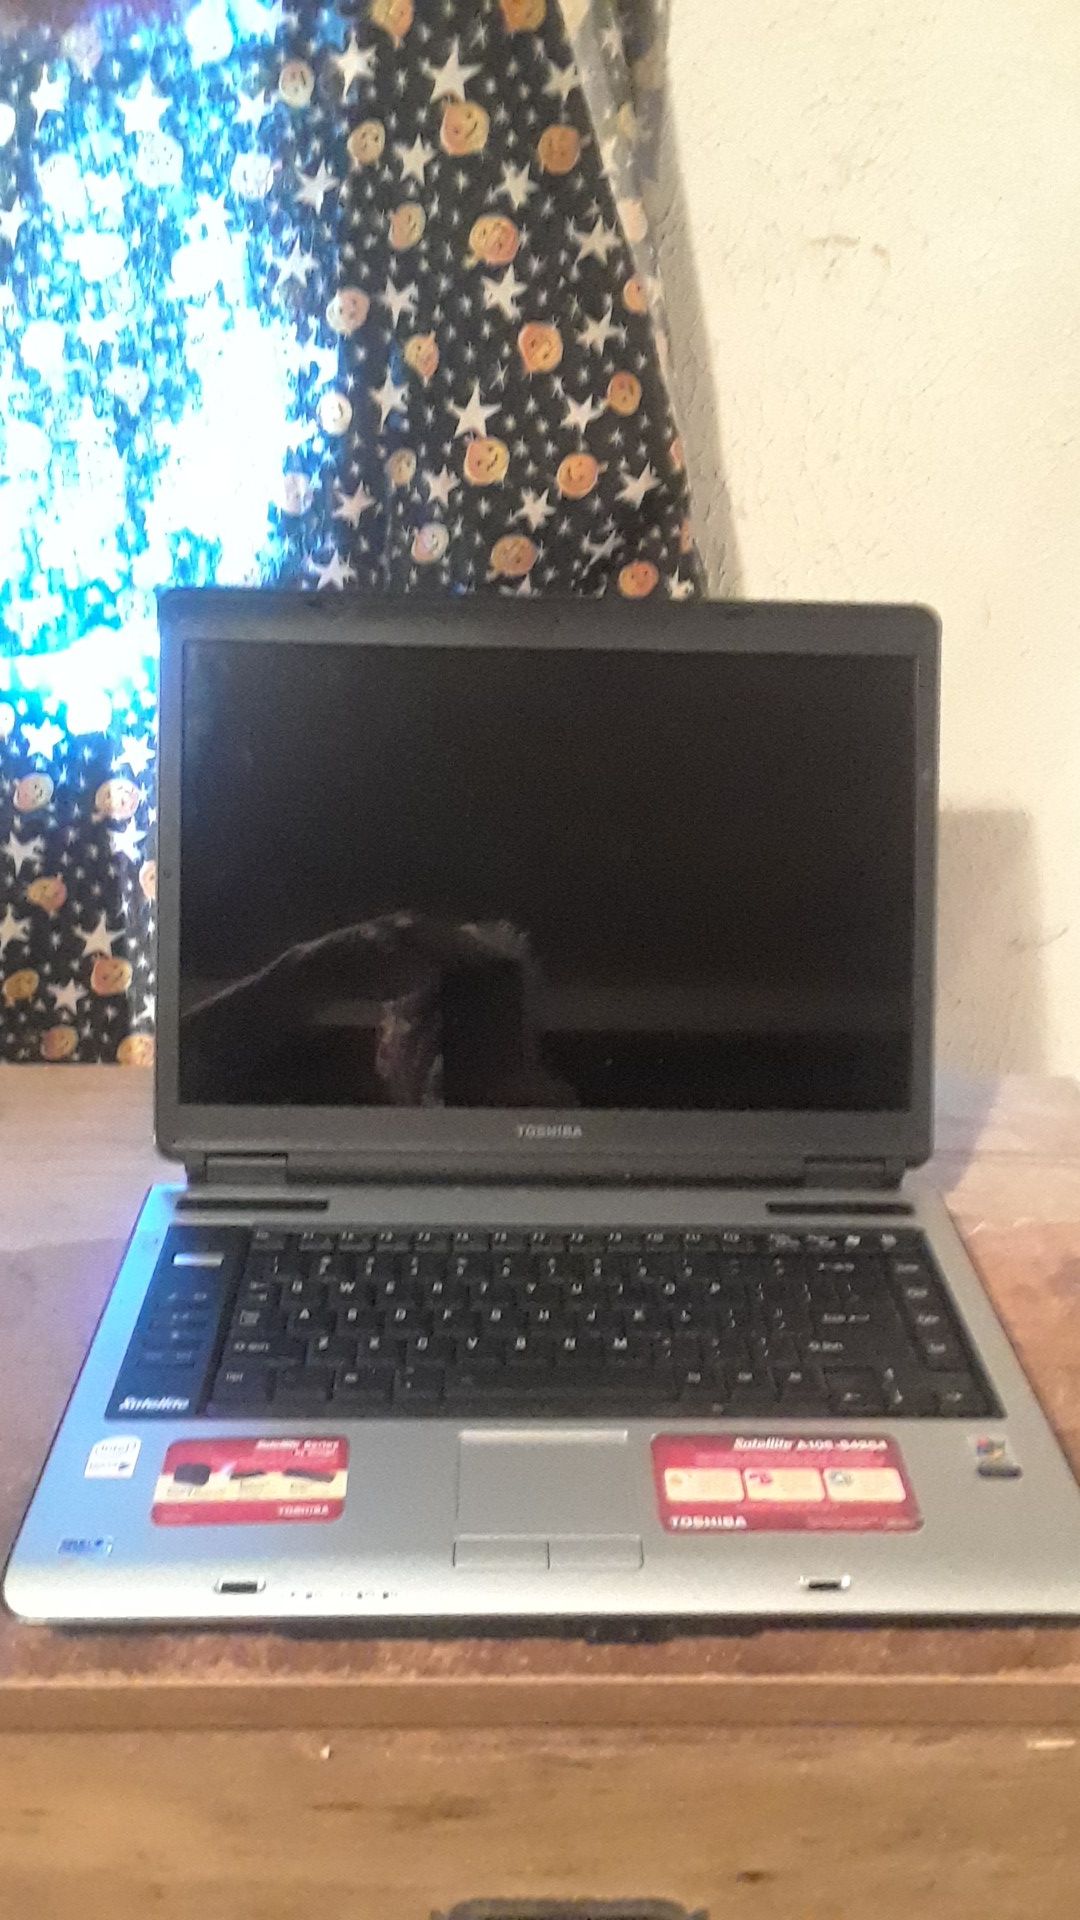 Toshiba laptop for sale good working order